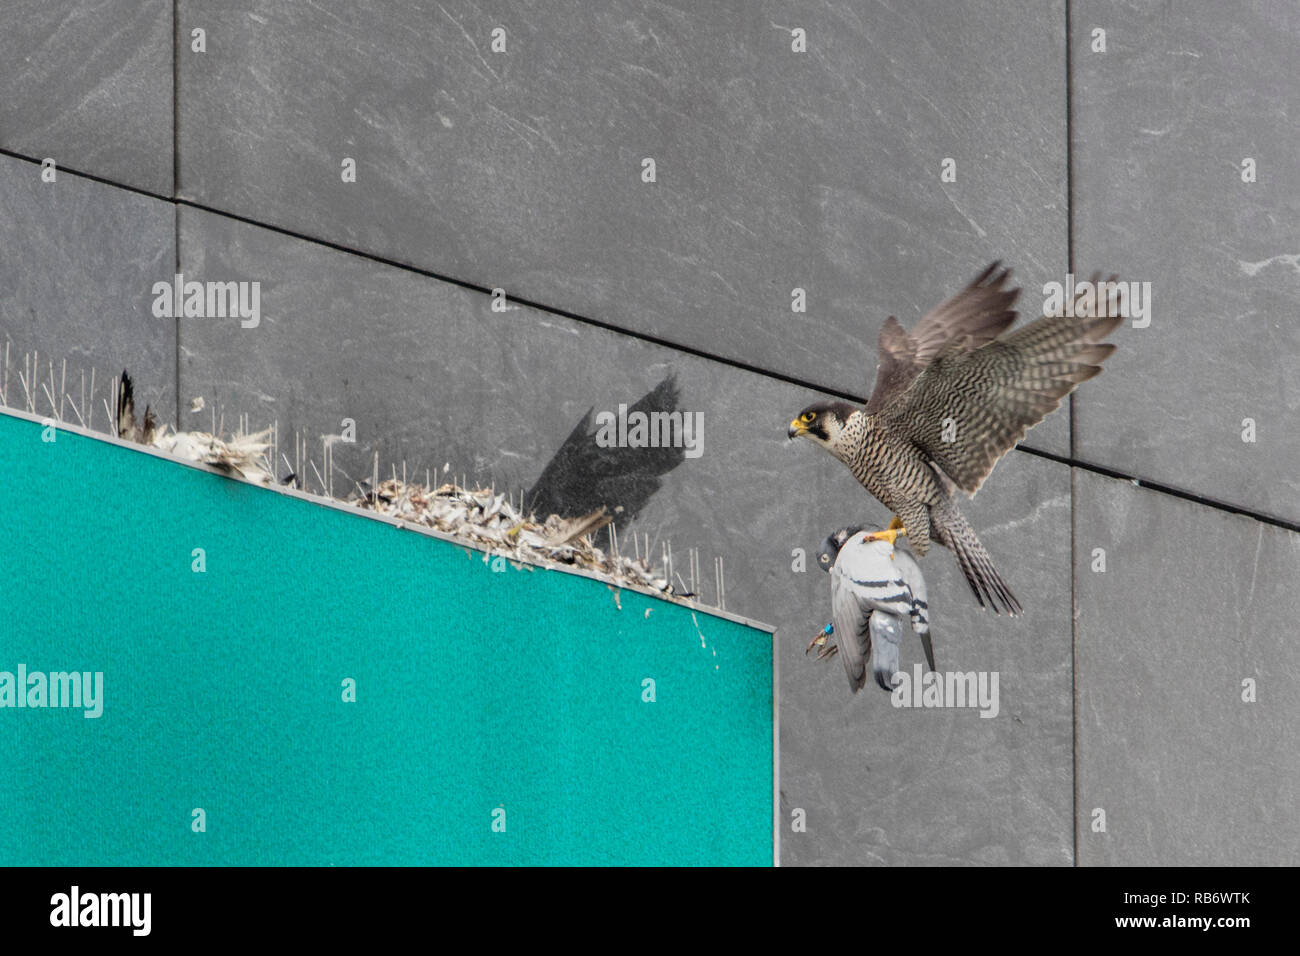 Peregrine falcon (Falco peregrinus) with prey (homing pigeon), breeding in nesting box on ABN-AMRO building in business district Zuidas, Amsterdam, Th Stock Photo